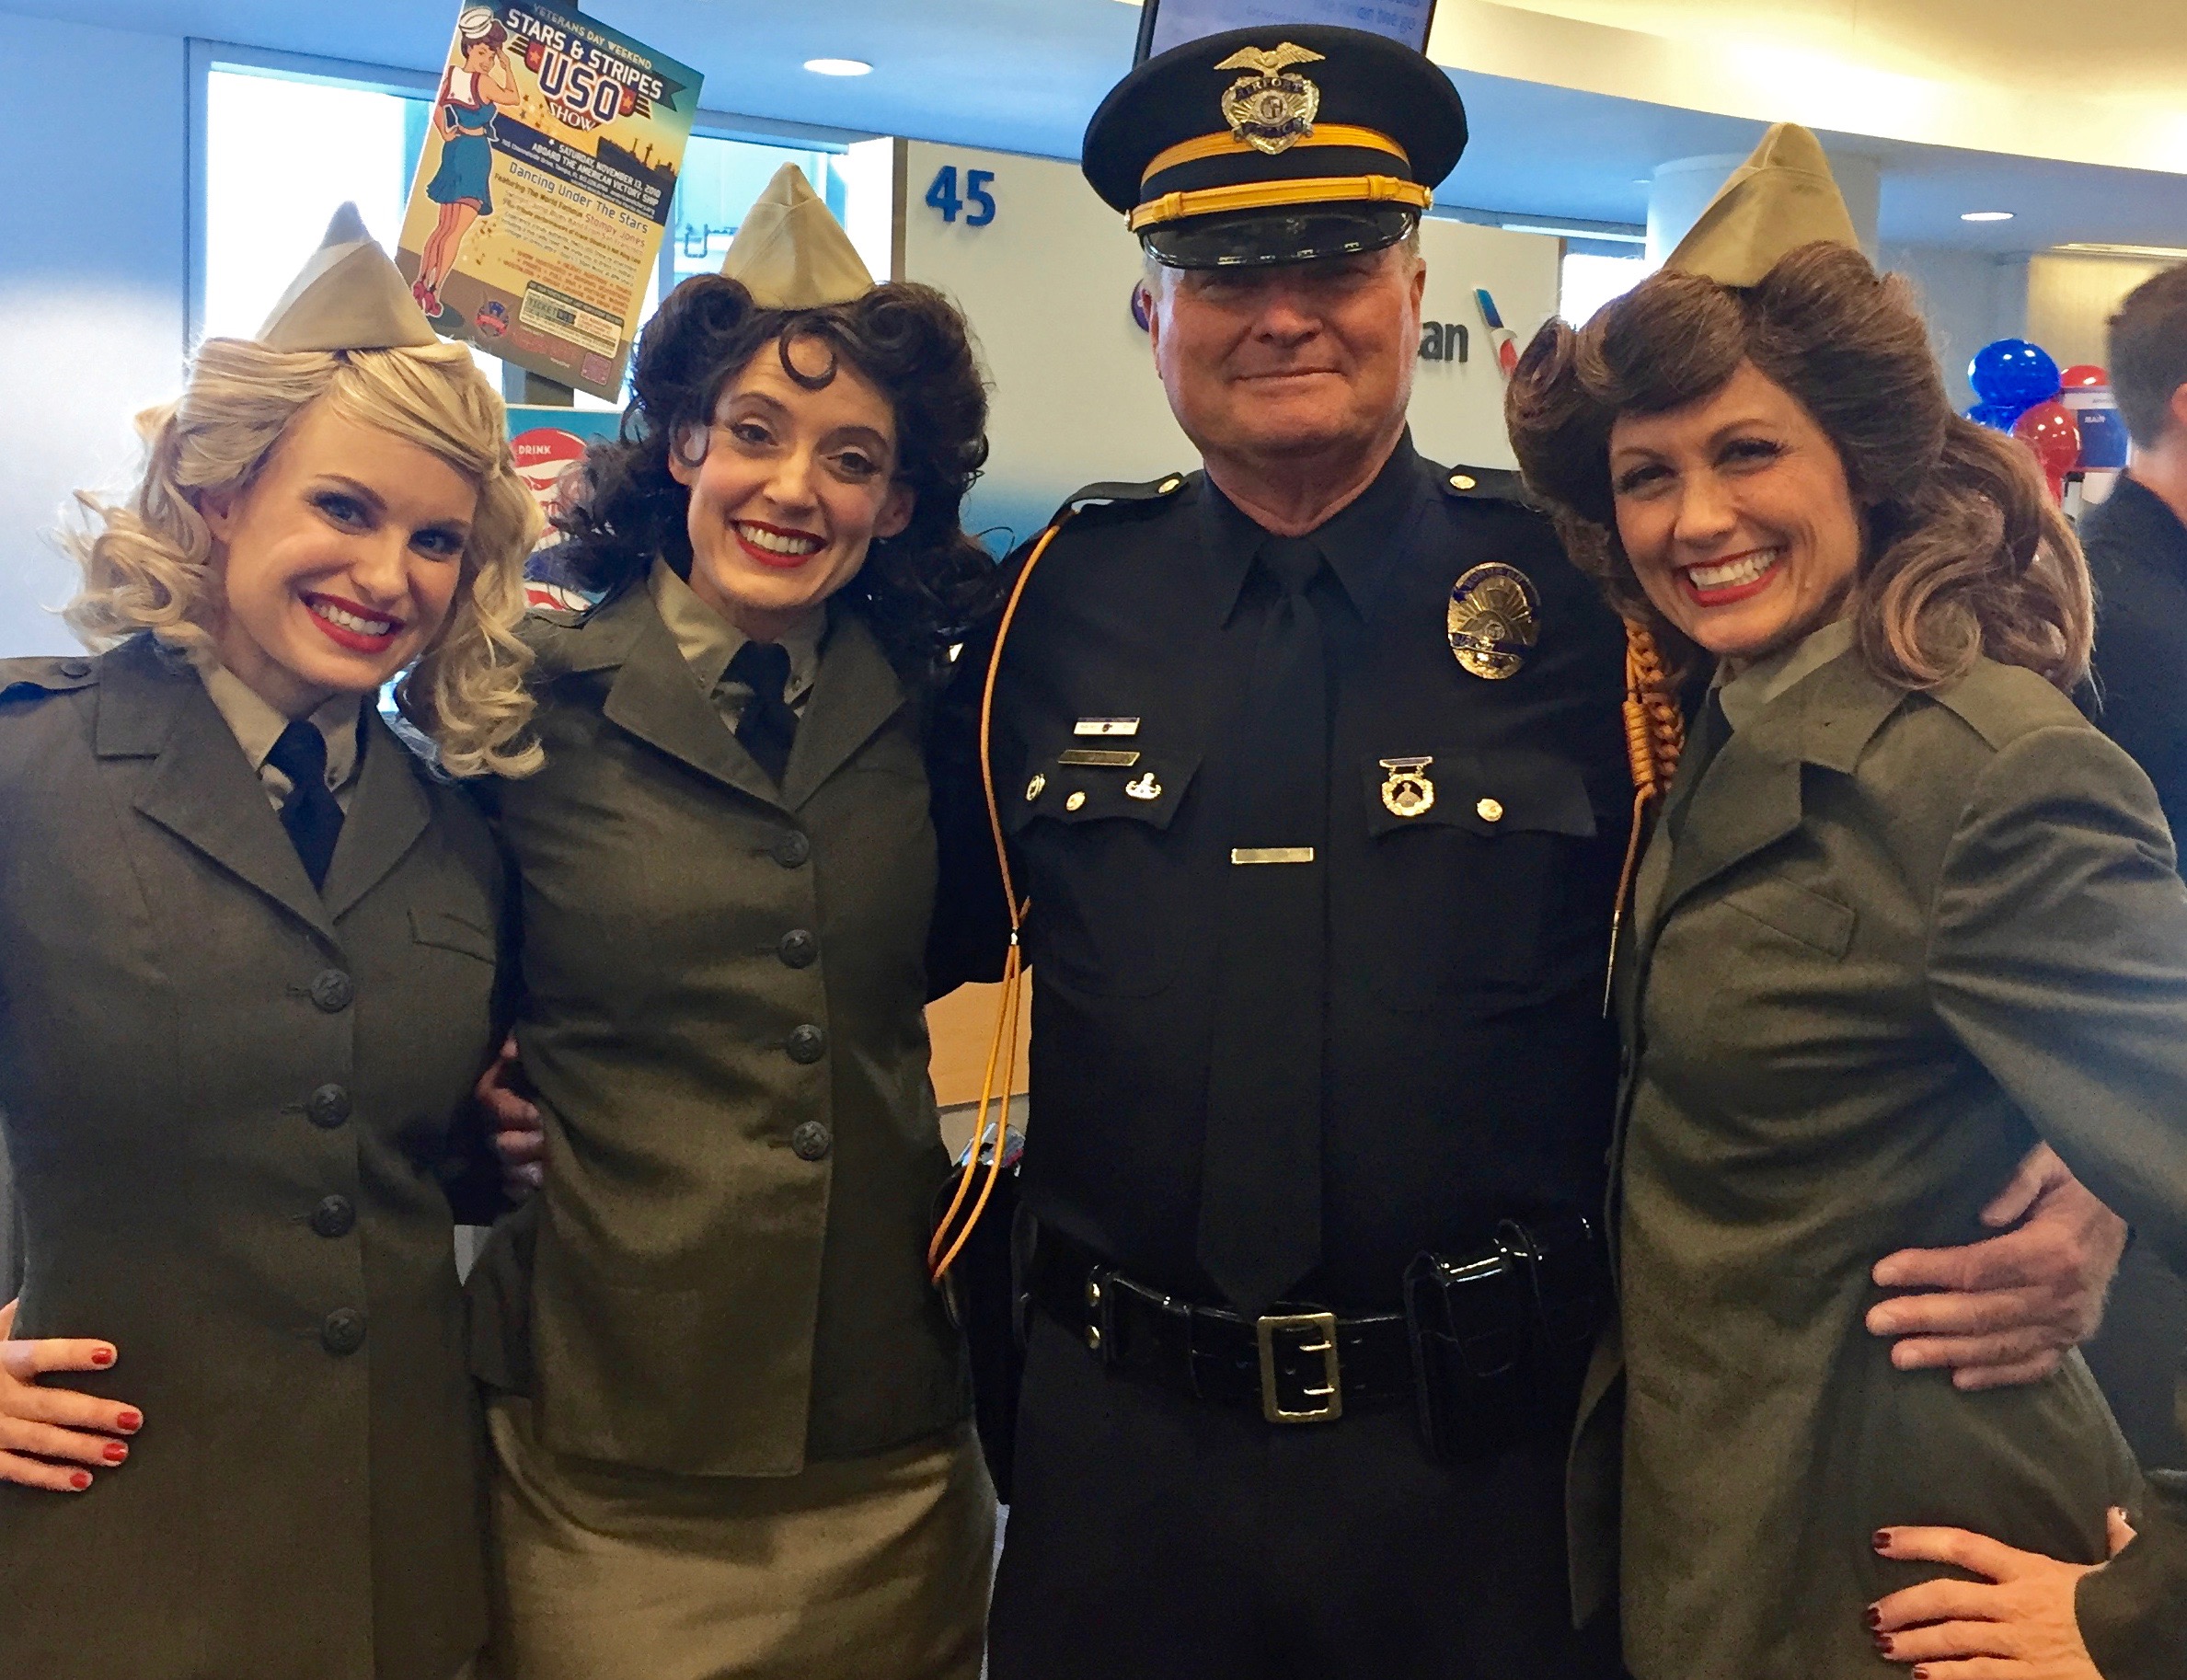 The Swing Dolls with one of LA's finest